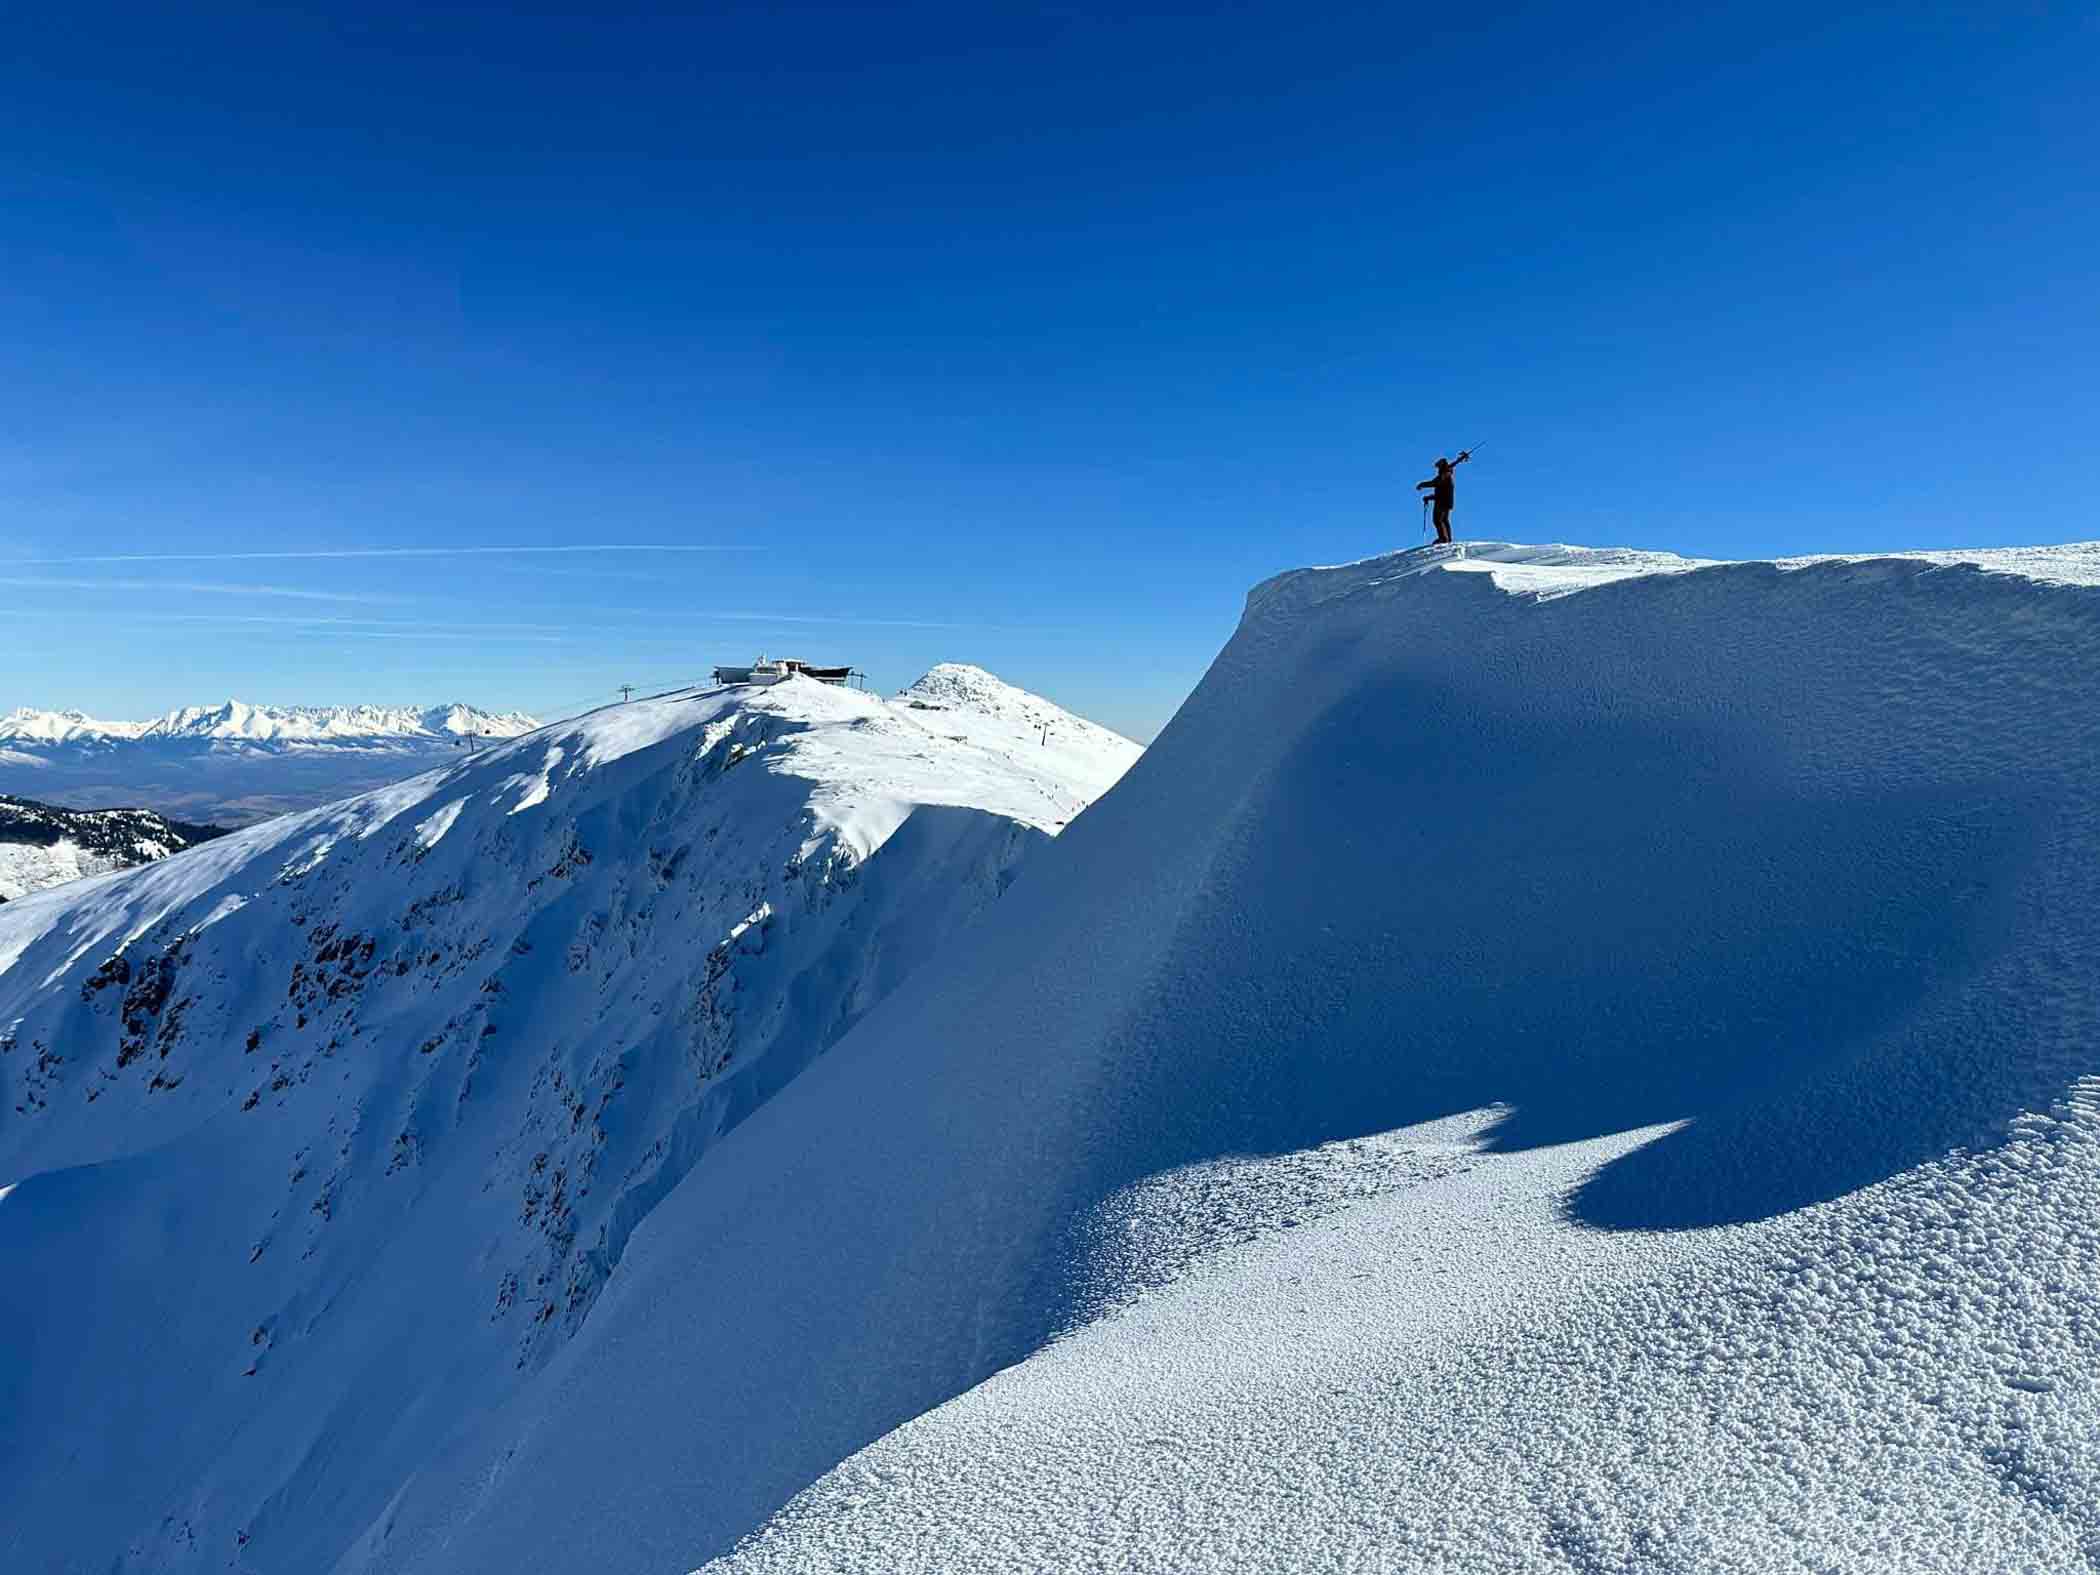 a skier, skis on shoulder, stands on a cornice overlooking a snowy slope